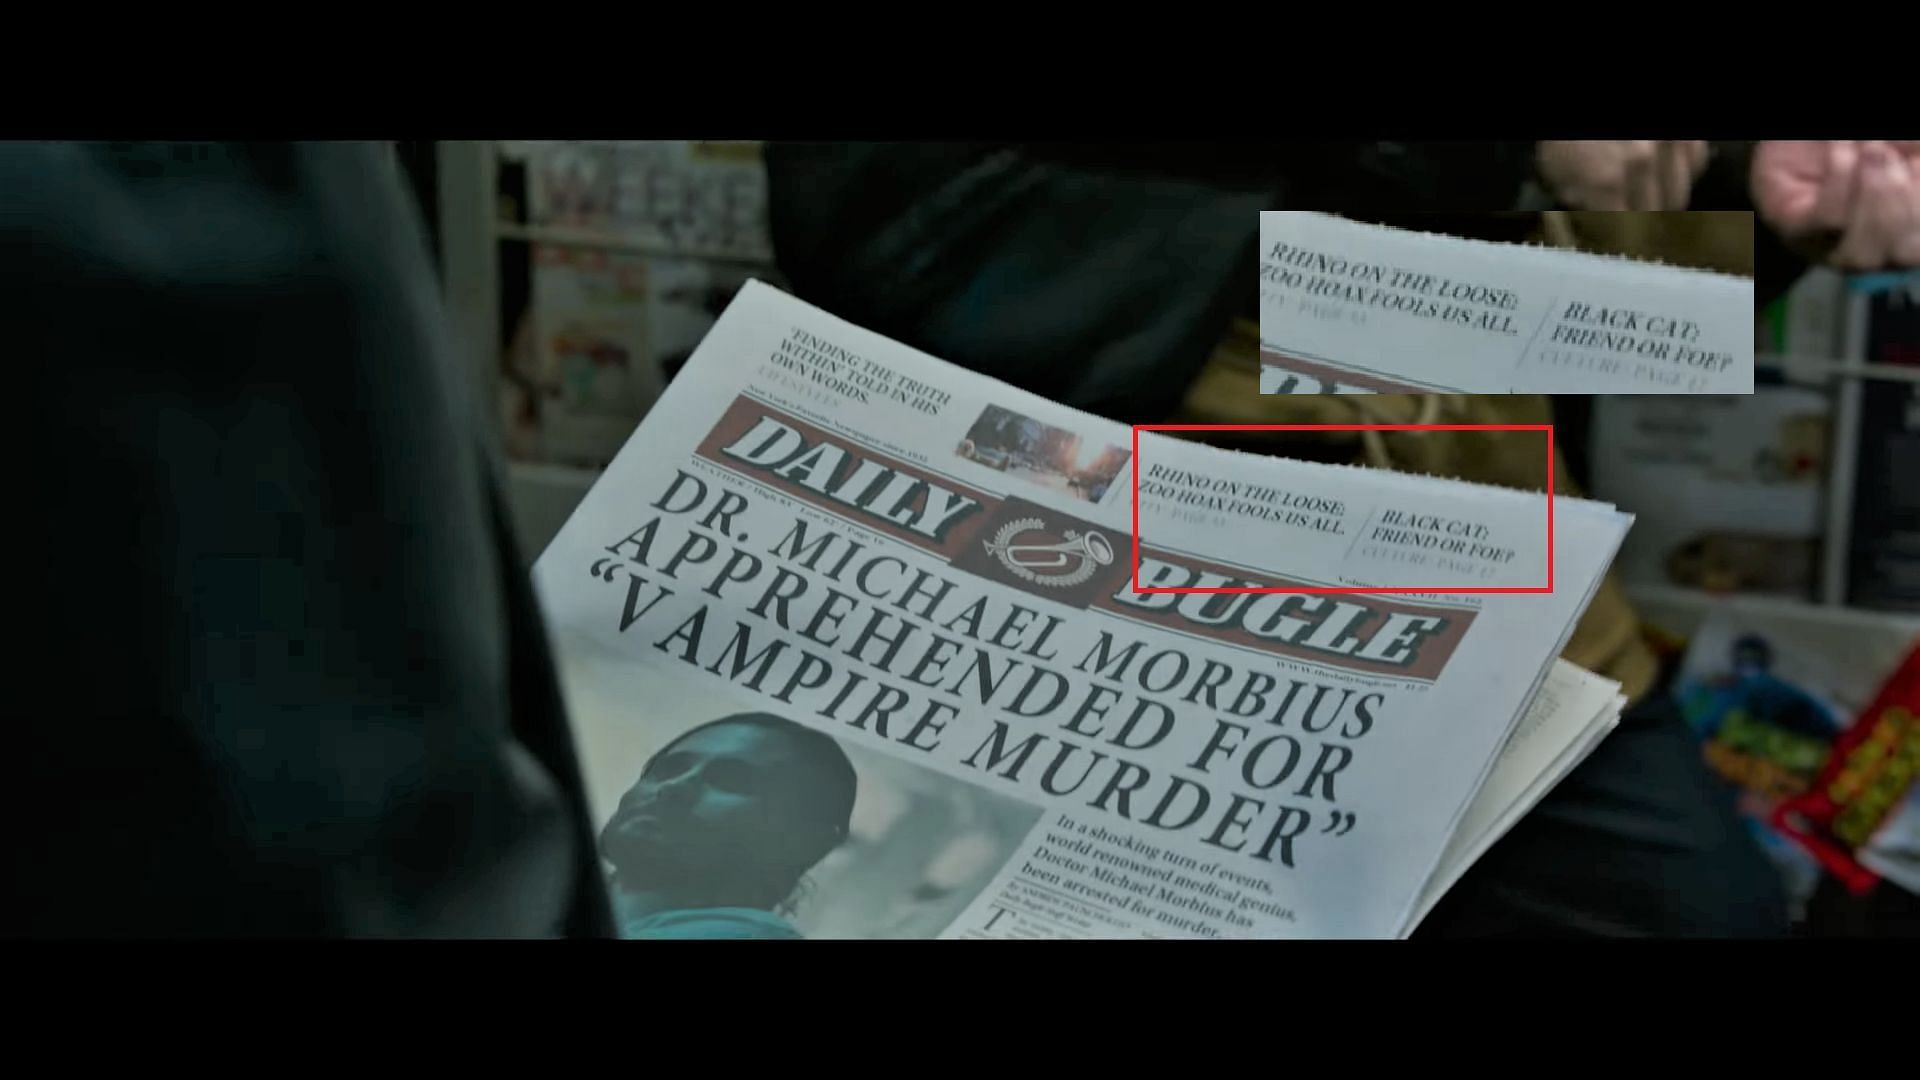 The Daily Bugle issue in the Morbius trailer (Image via Sony Pictures Entertainment/Marvel)